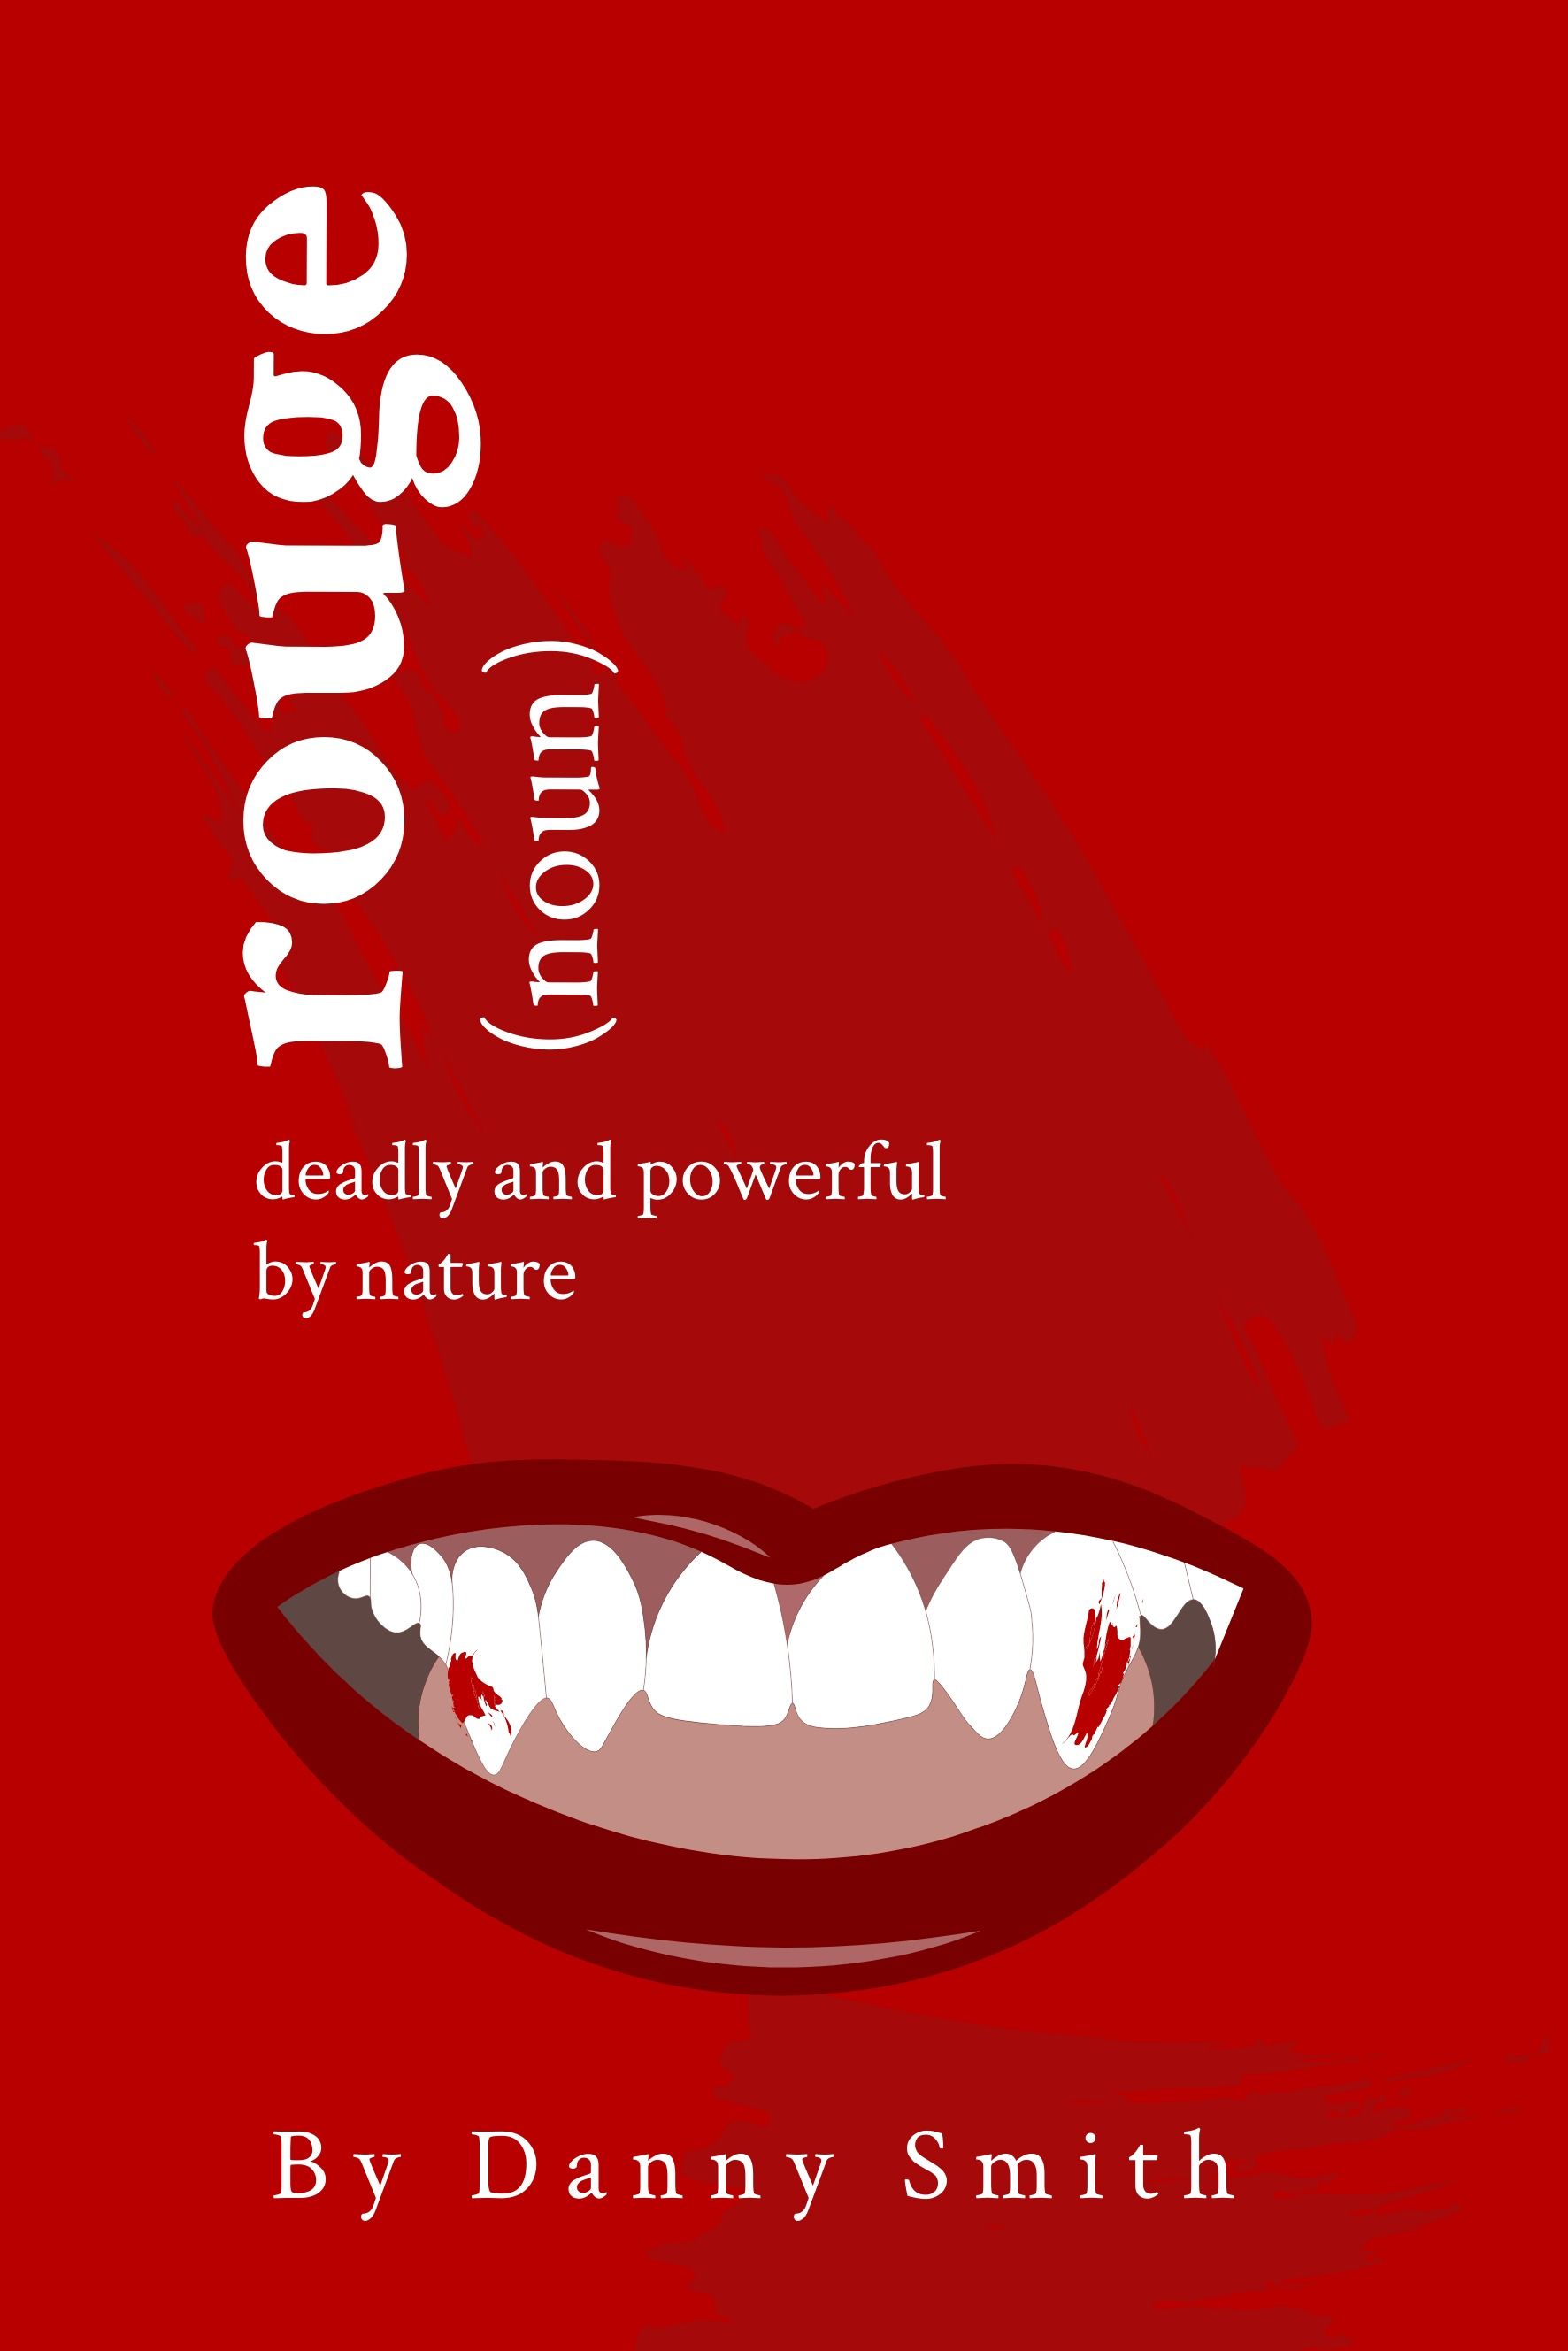 Shades of Red Book Cover with 'Rouge' by placeholder author name 'Danny Smith' using serif font and lips icon - The complete guide to fonts: 5 essential types of fonts in typography - Image